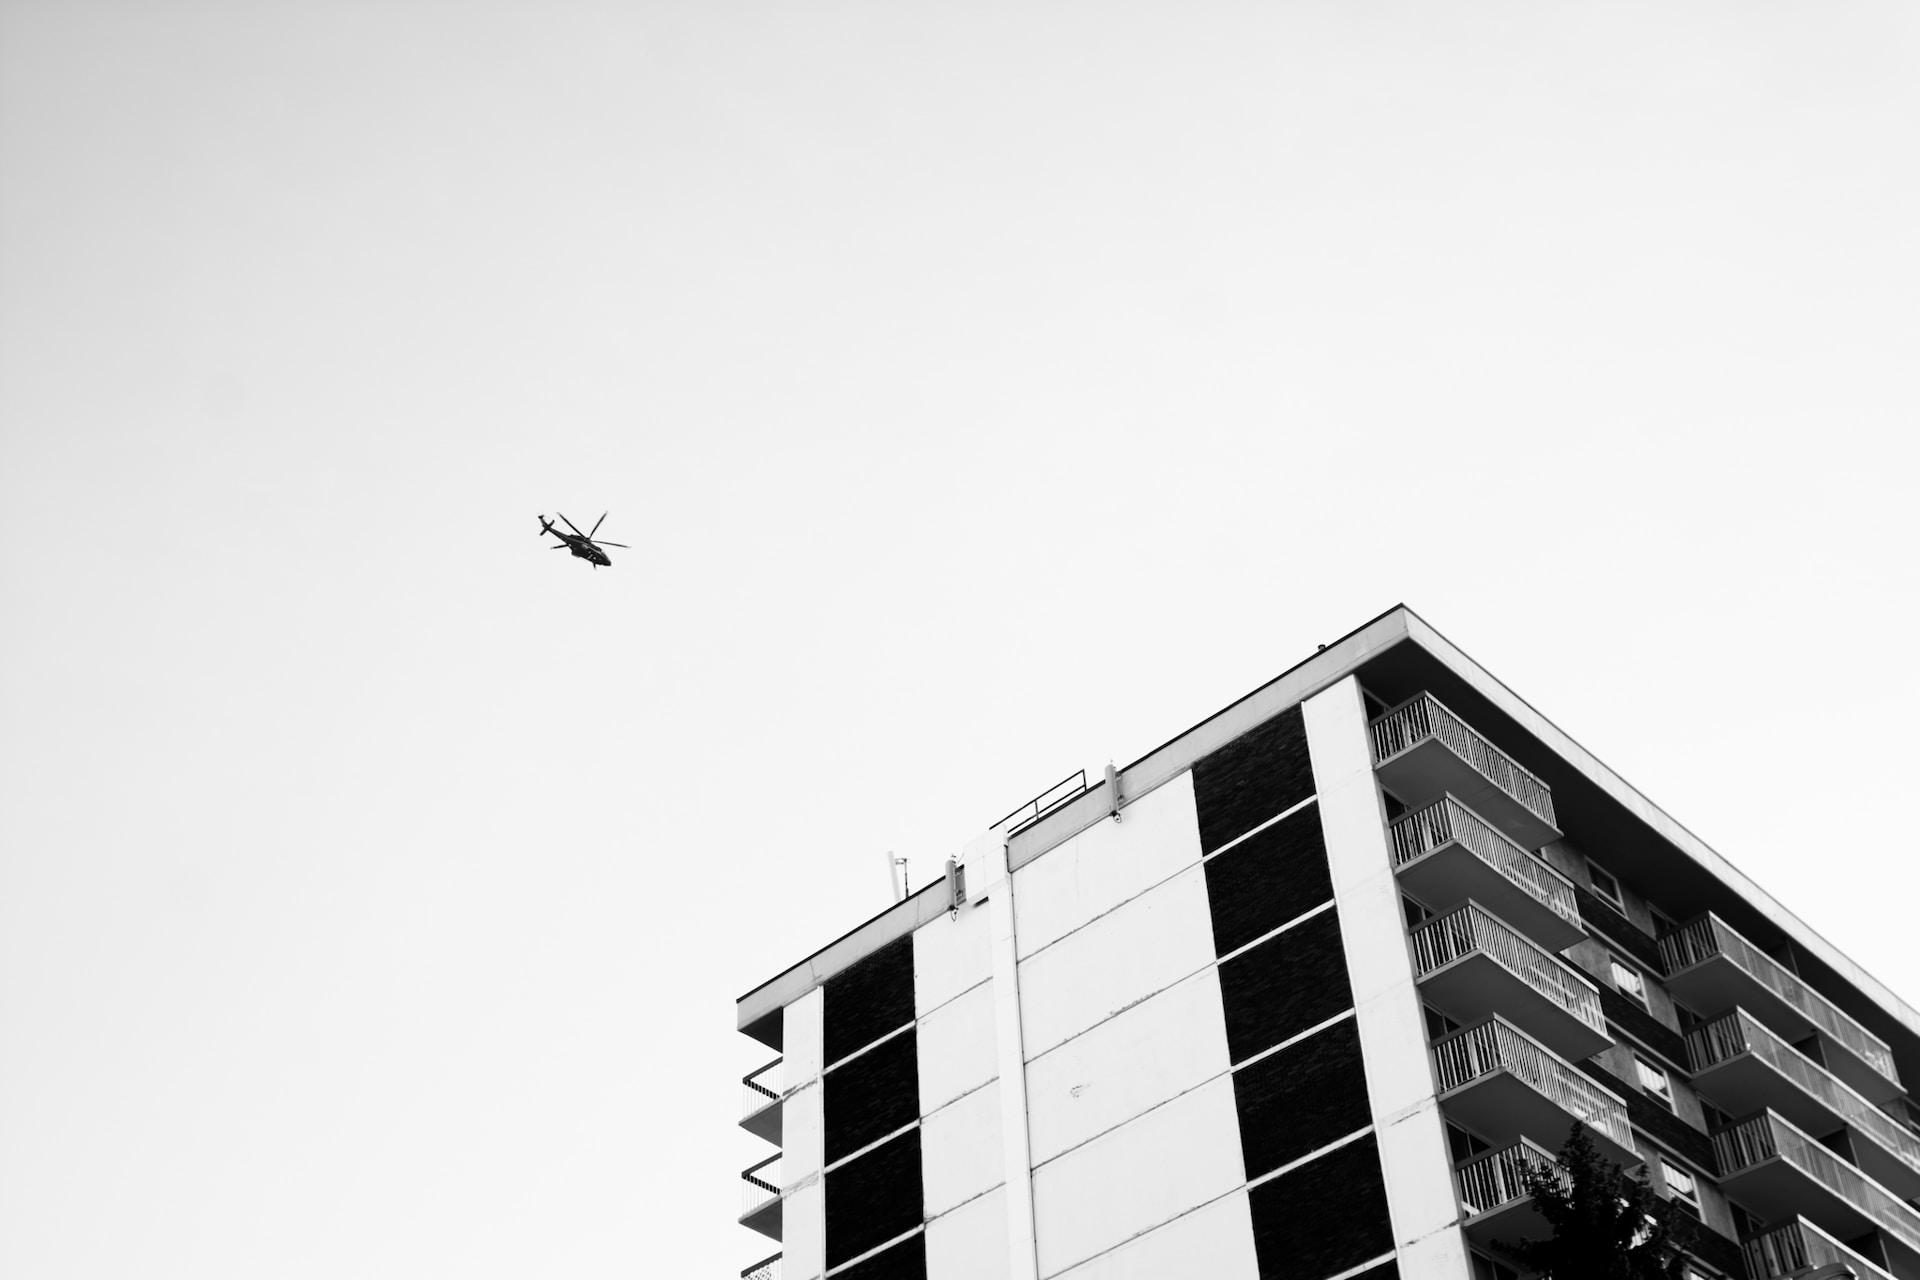 black and white image of a high rise block of flats with a helicopter in the distance